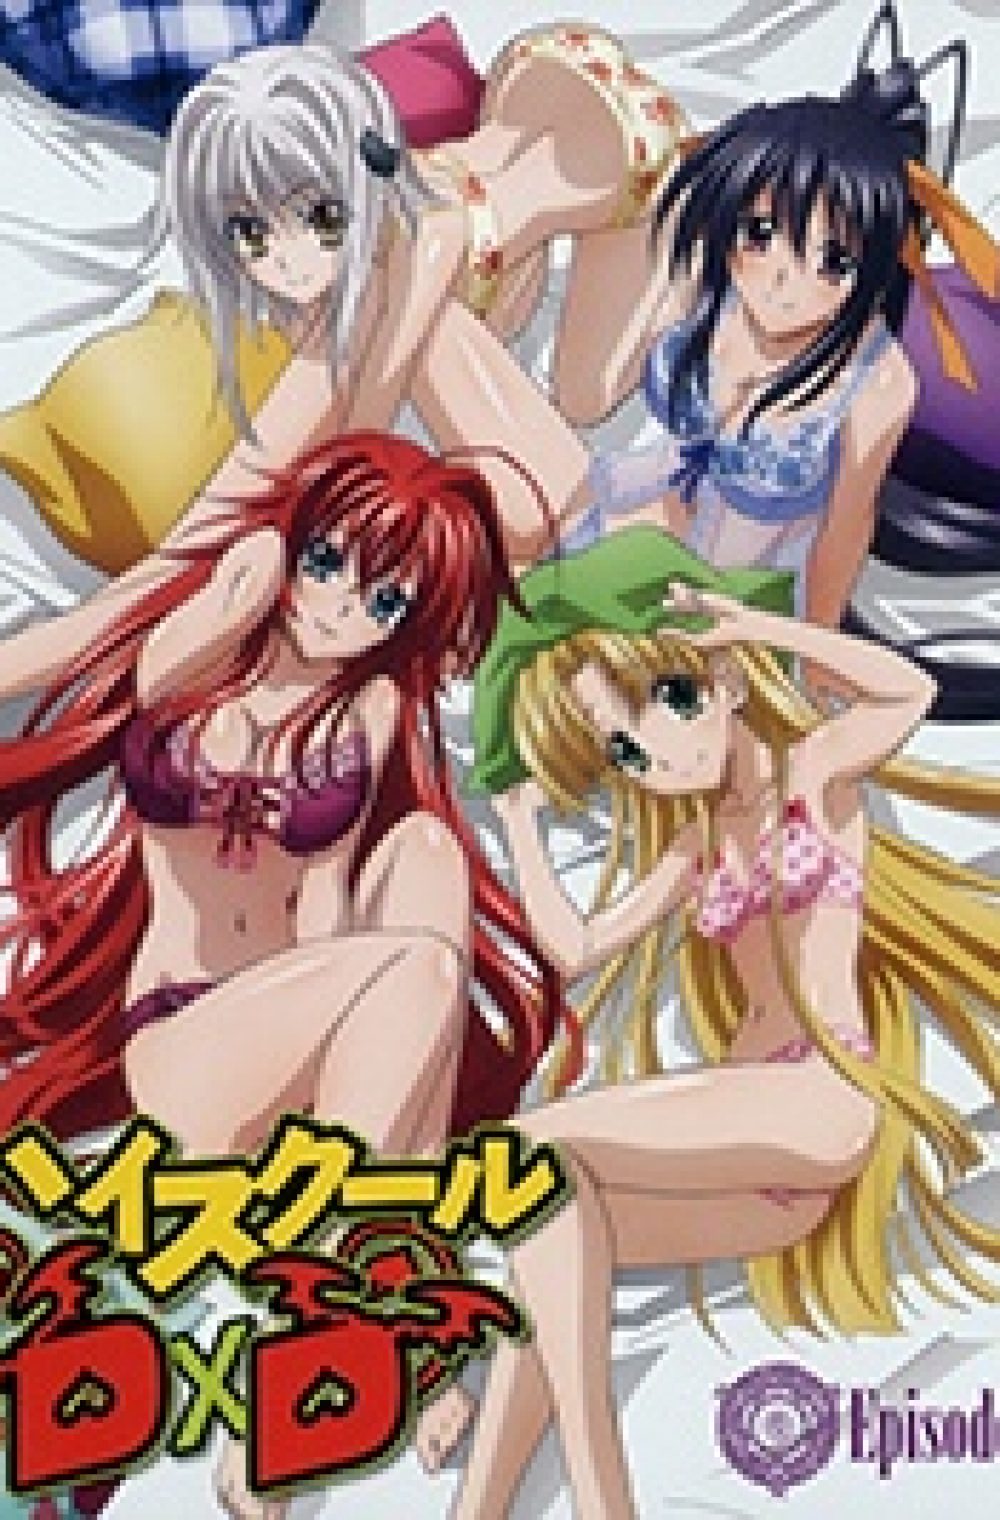 what order to watch highschool dxd